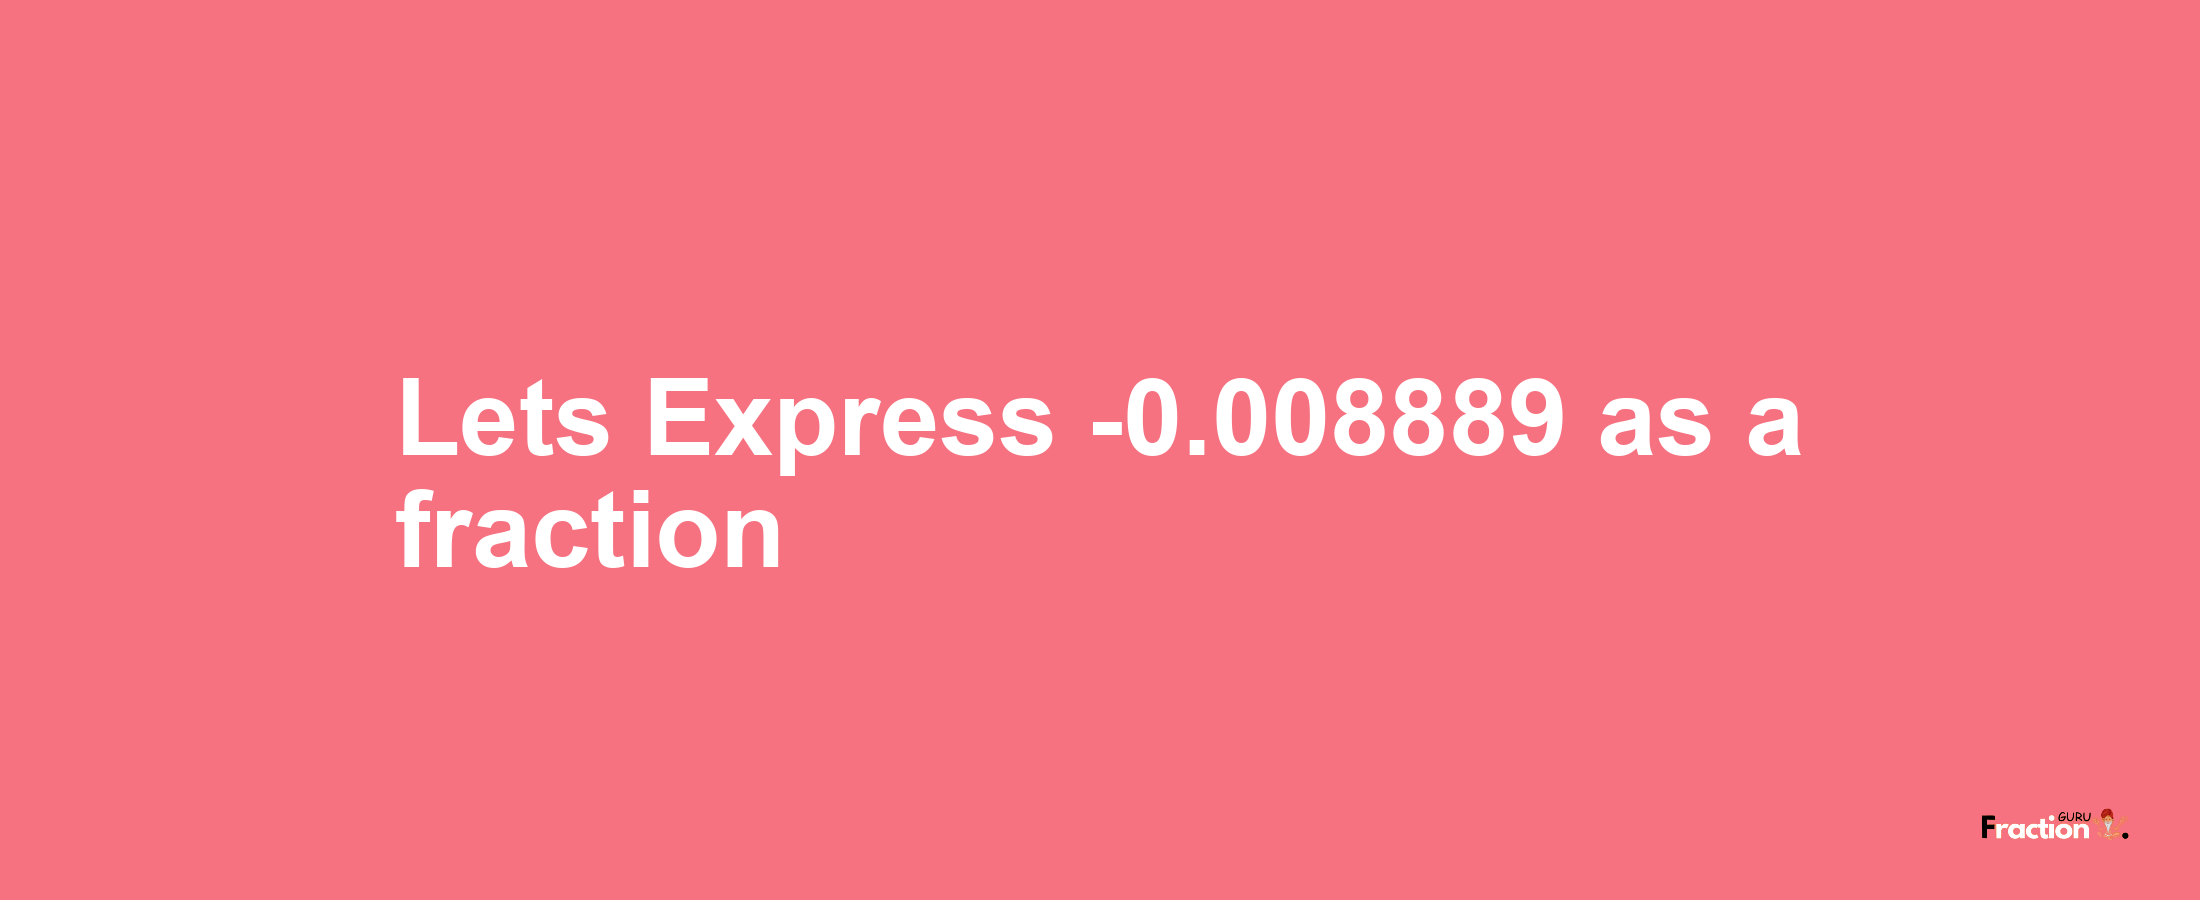 Lets Express -0.008889 as afraction